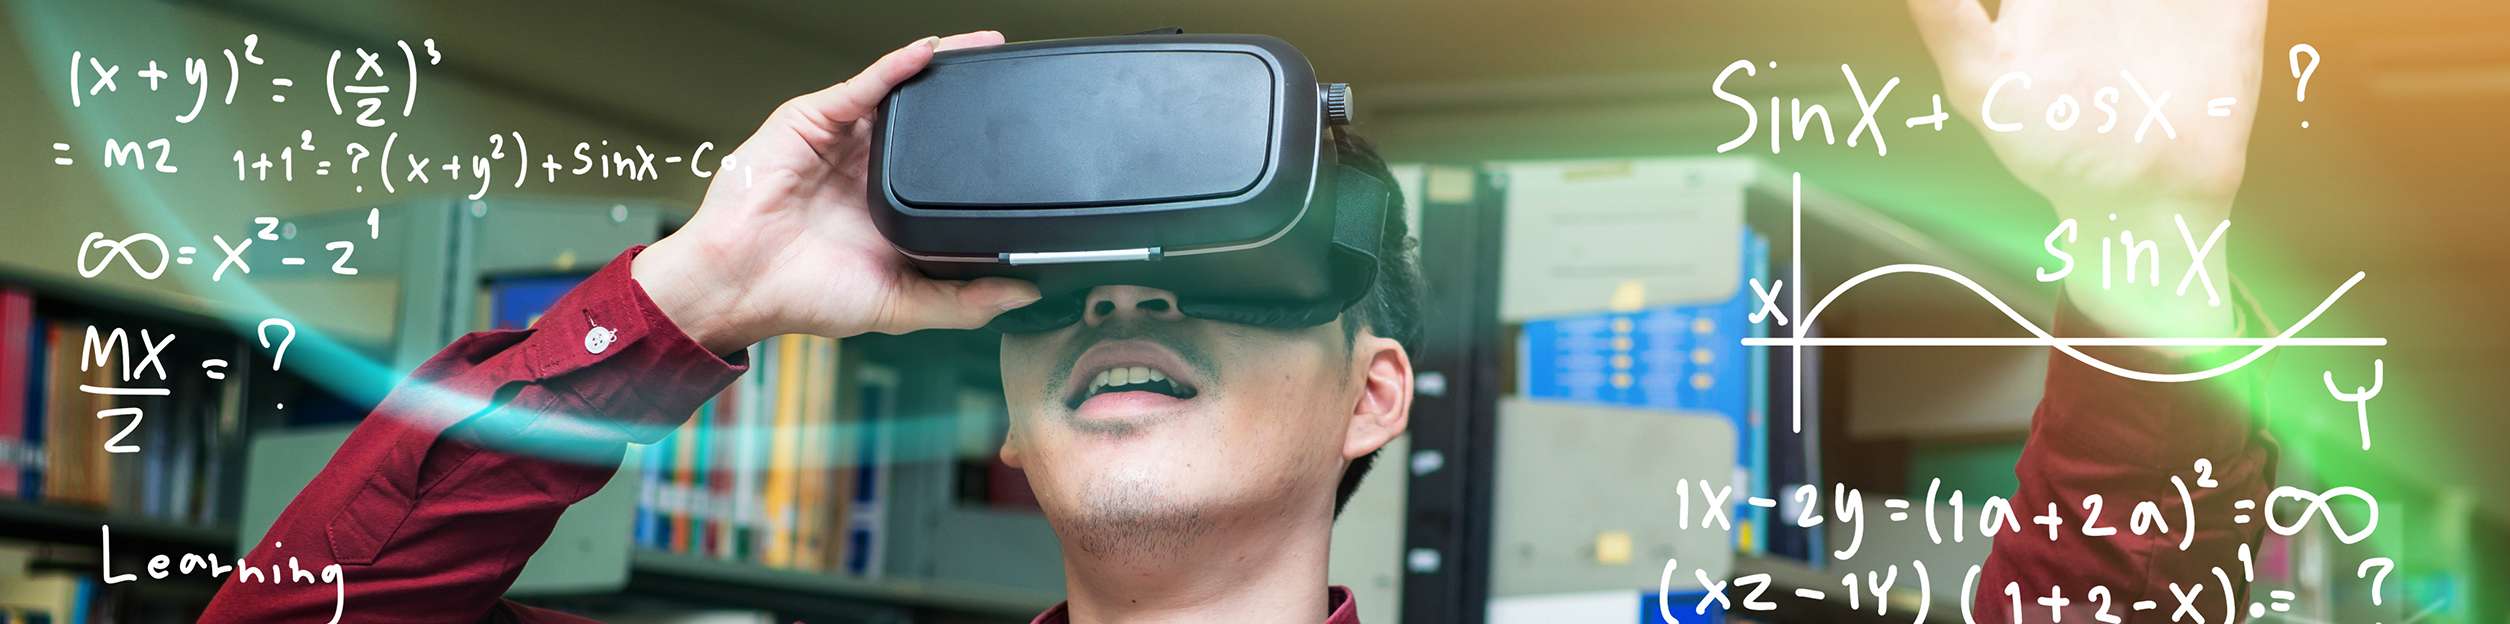 Graphic of student using a VR headset. Floating letters and numbers surround his head